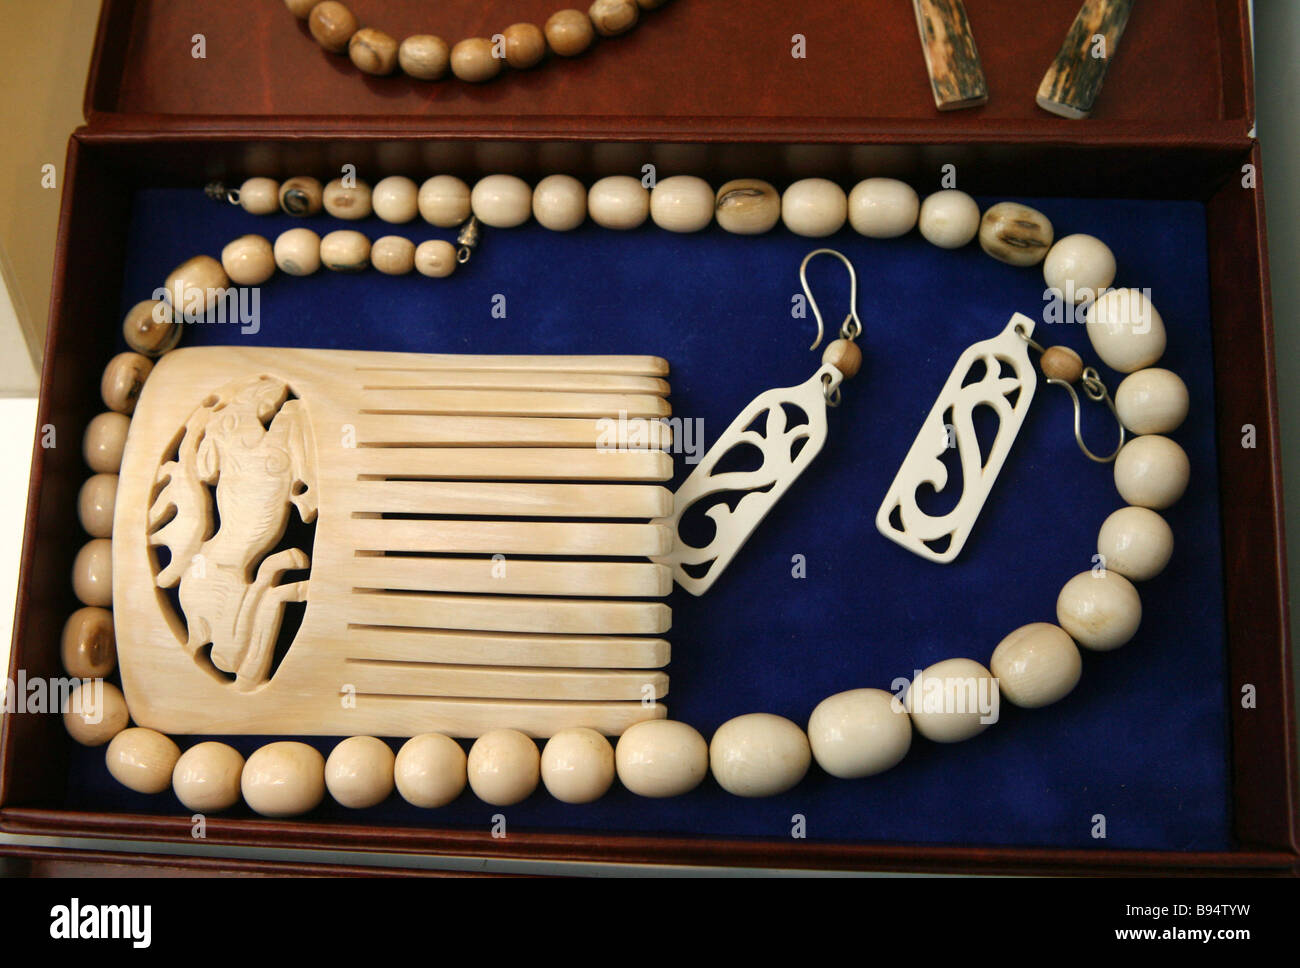 Mammoth bone jewelry by Nikolai Peristov from Omsk at the 6th All Russia exhibition Symbols of Motherland The All Russia Stock Photo